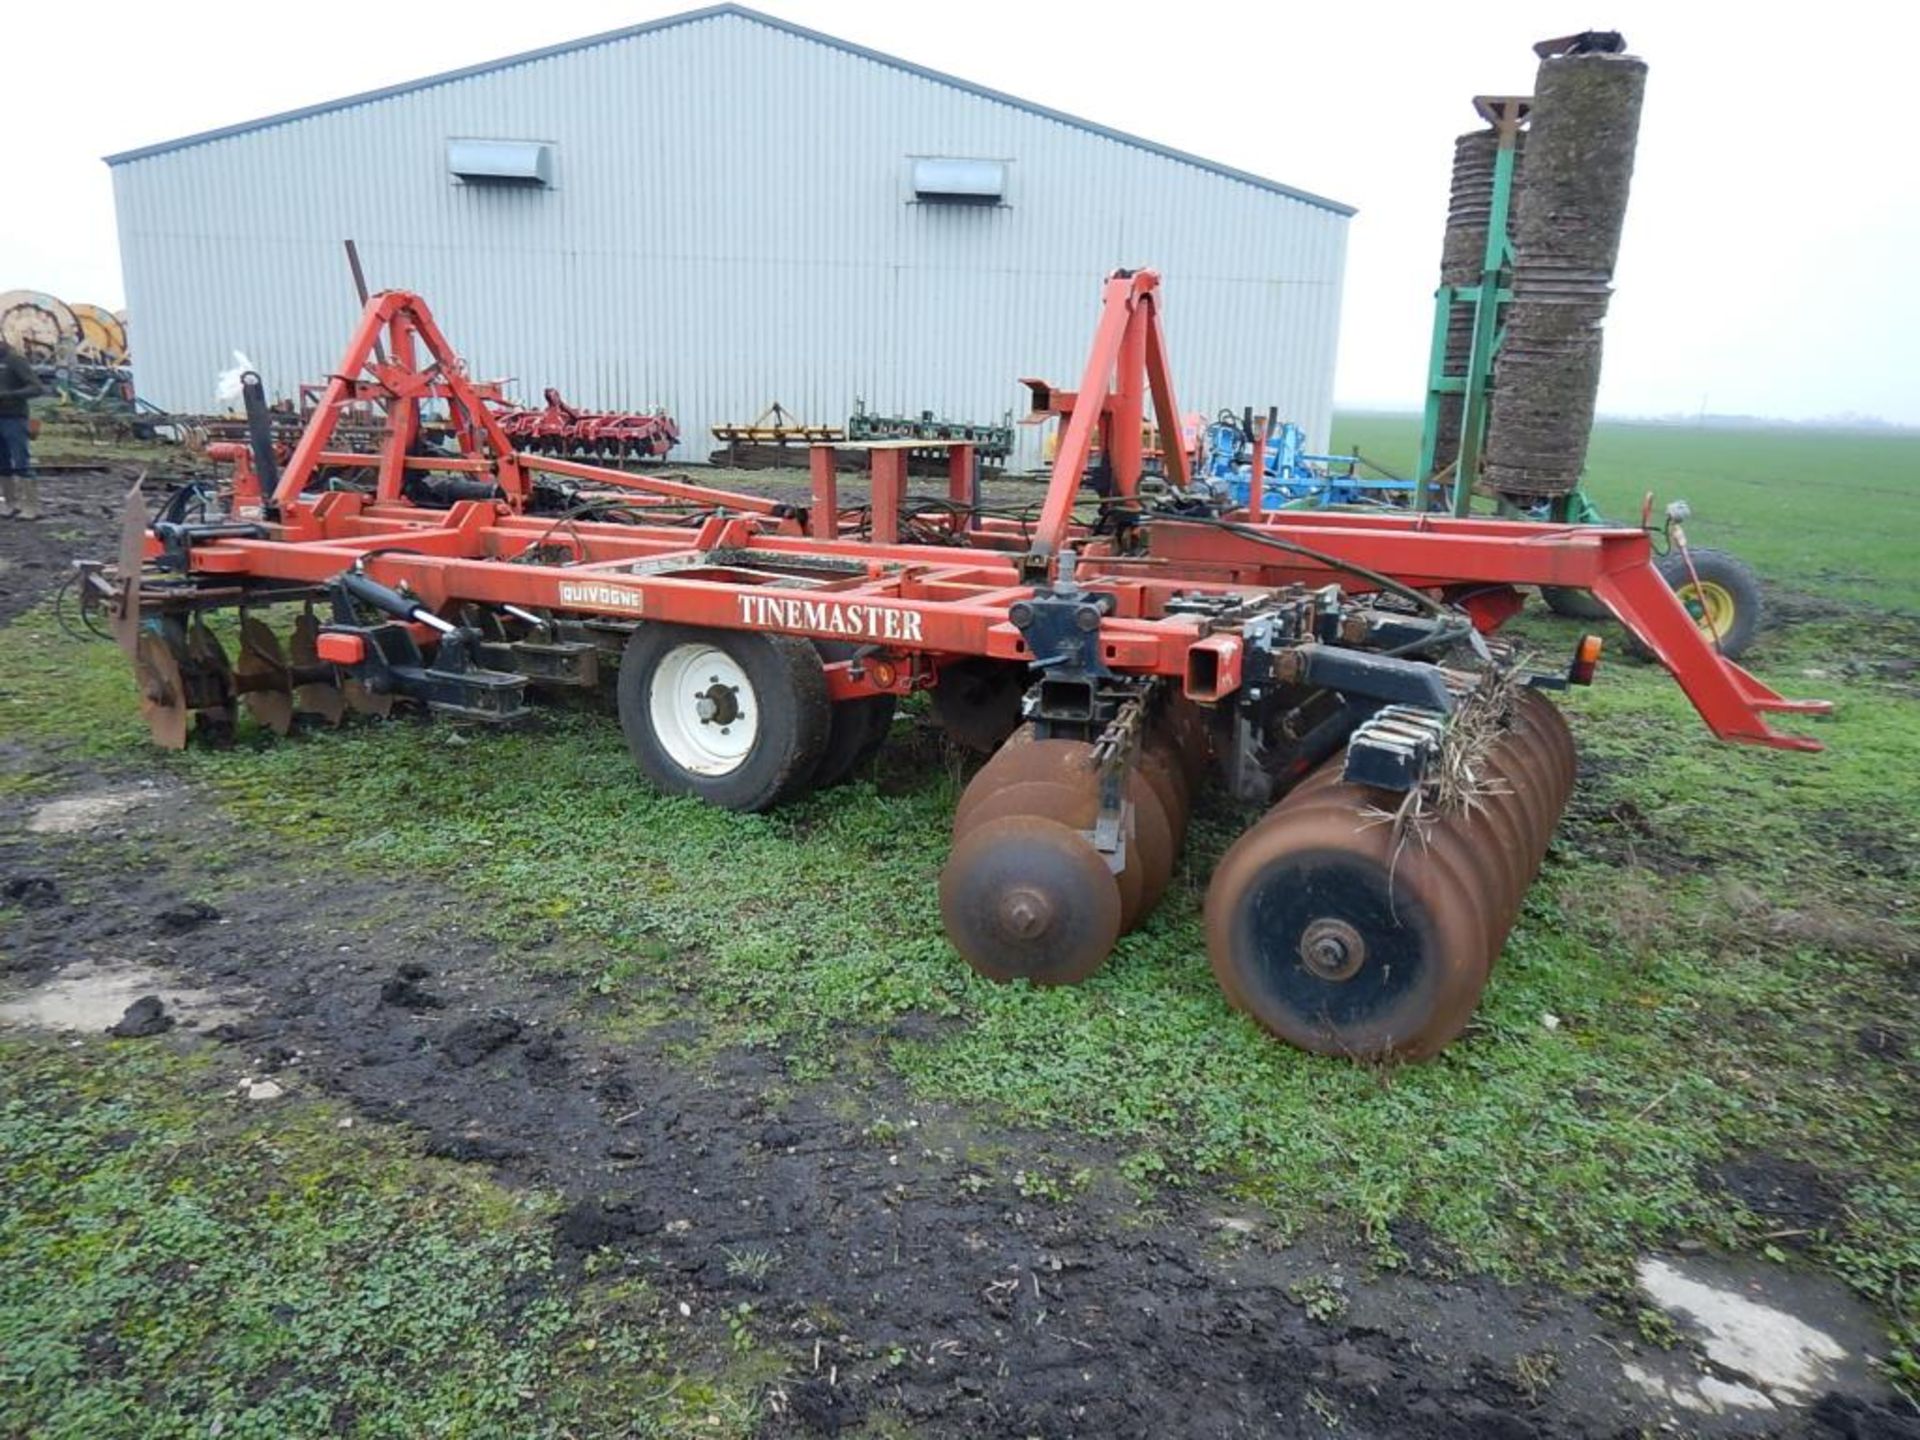 2001 Quivogne Tinemaster trailed hydraulic folding with discs, rear press and tines (not fitted), 4m - Image 3 of 5